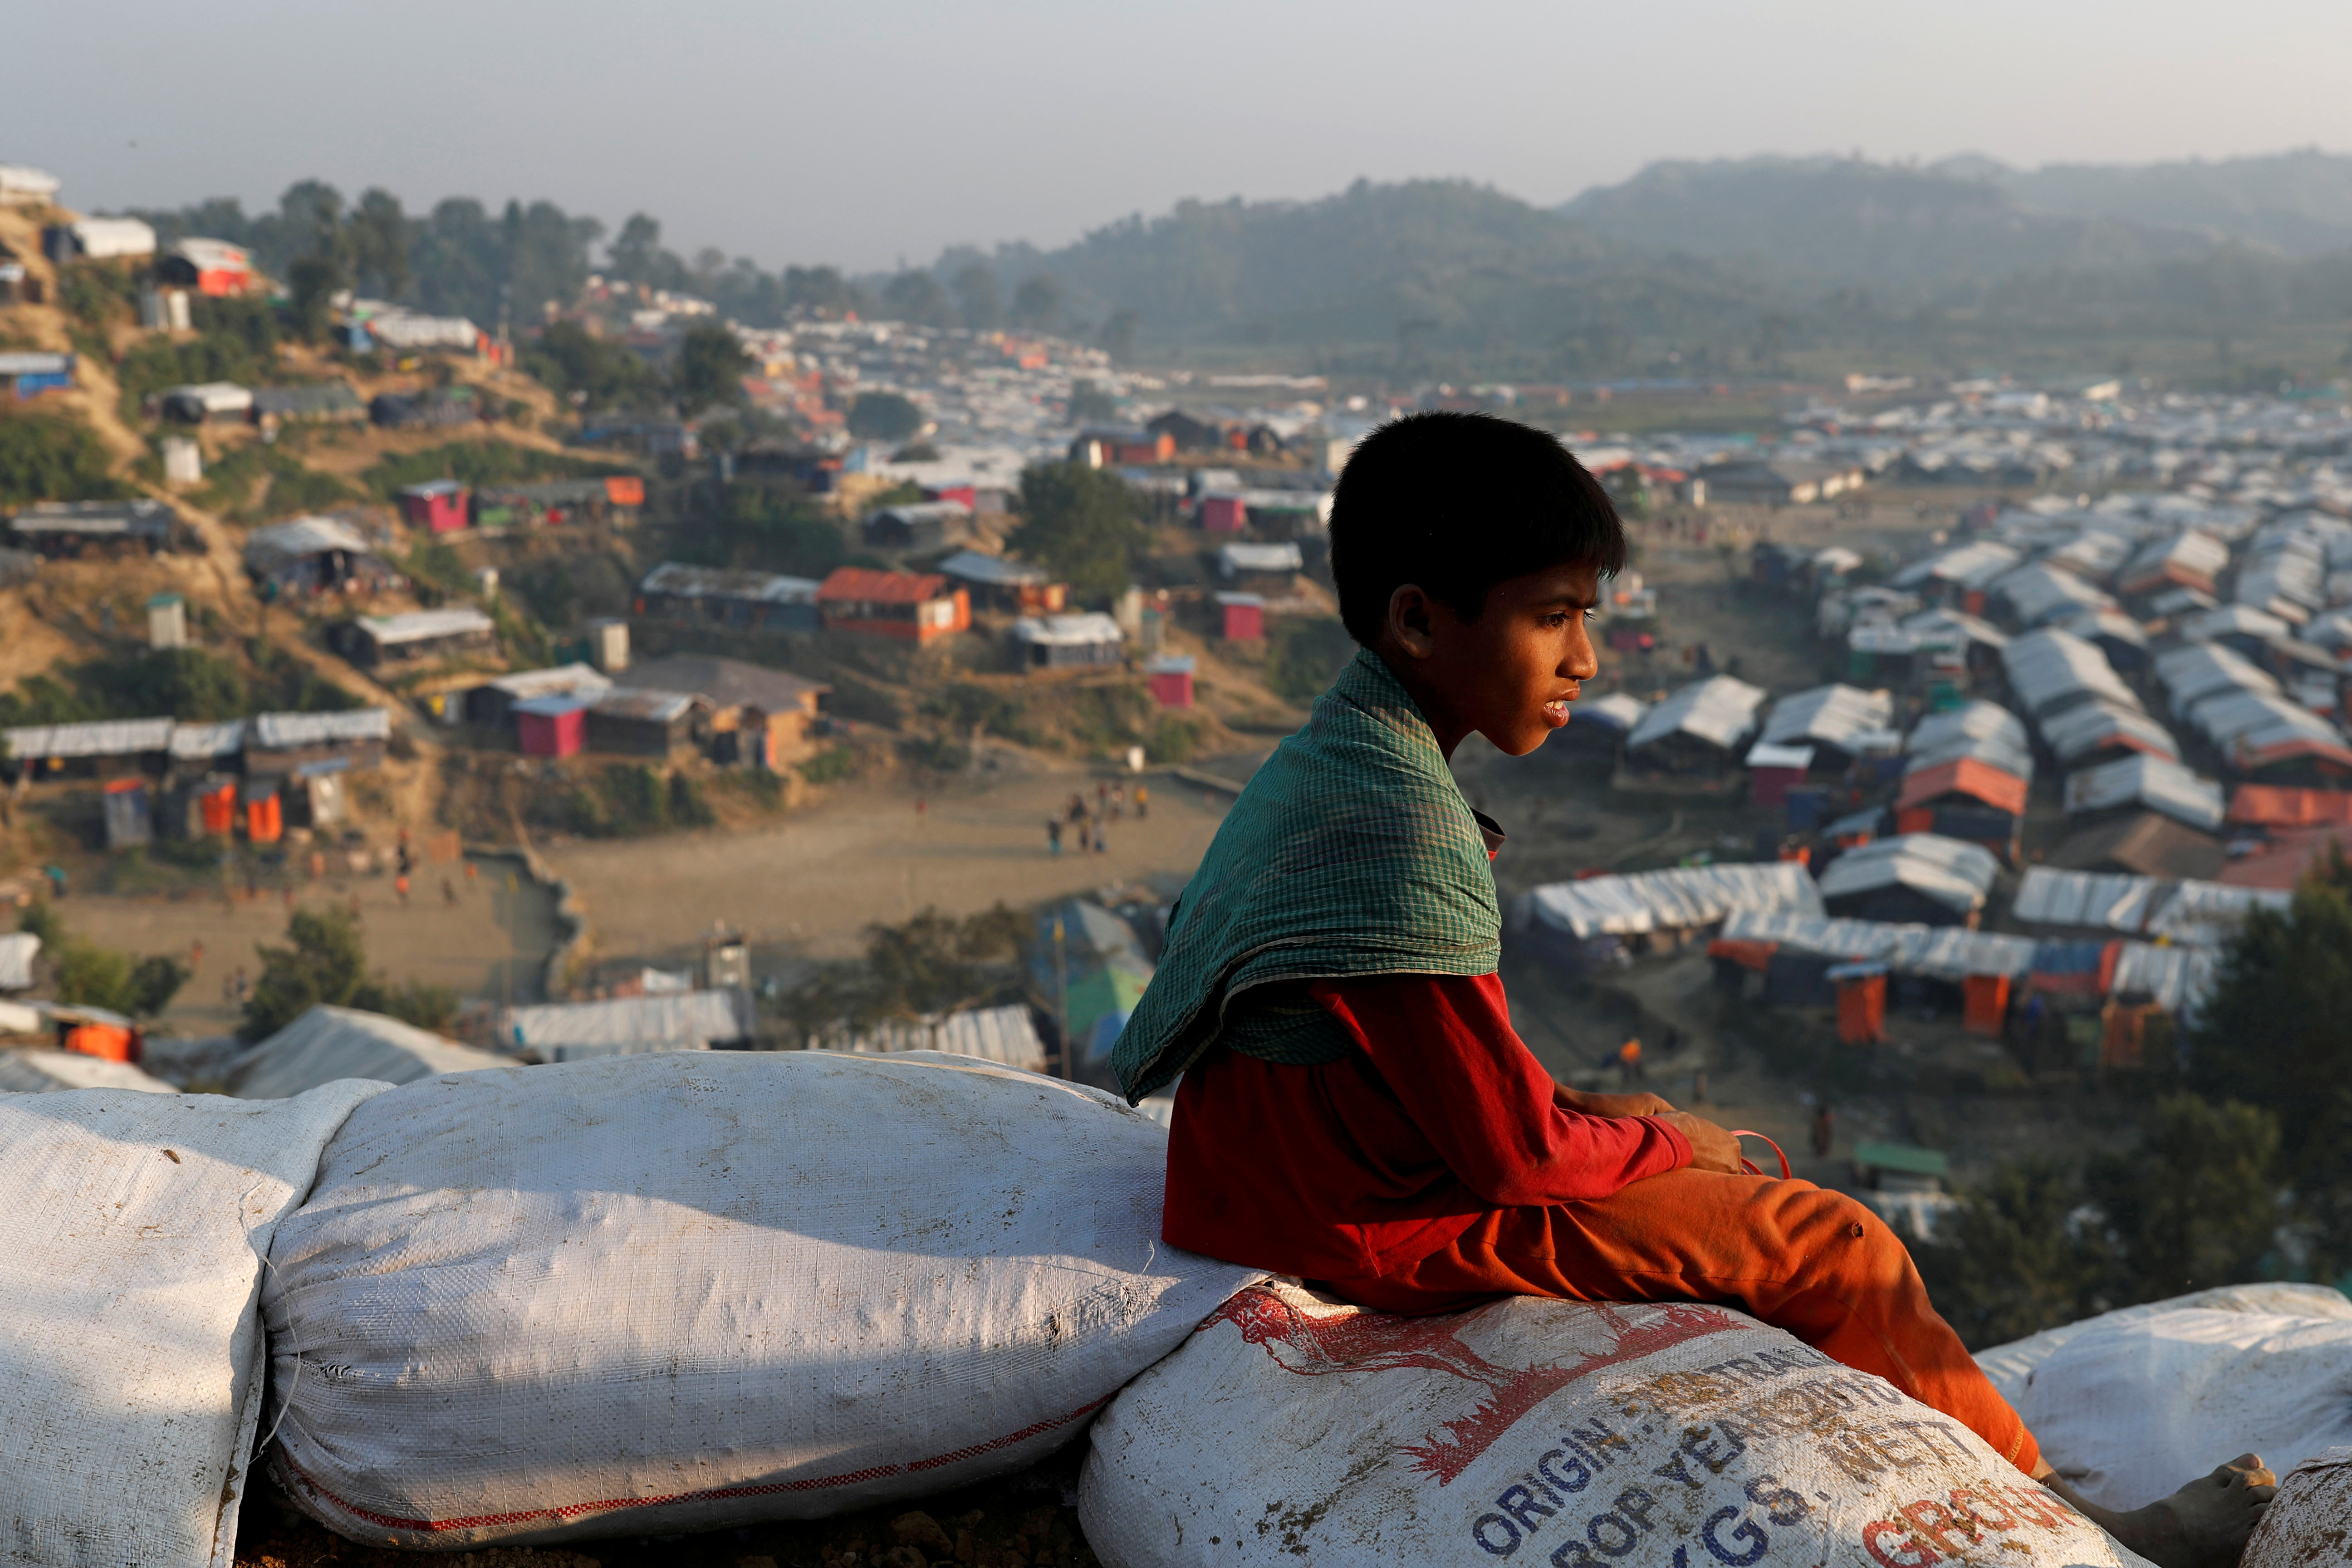 Rohingya leaders to issue citizenship demand ahead of repatriation